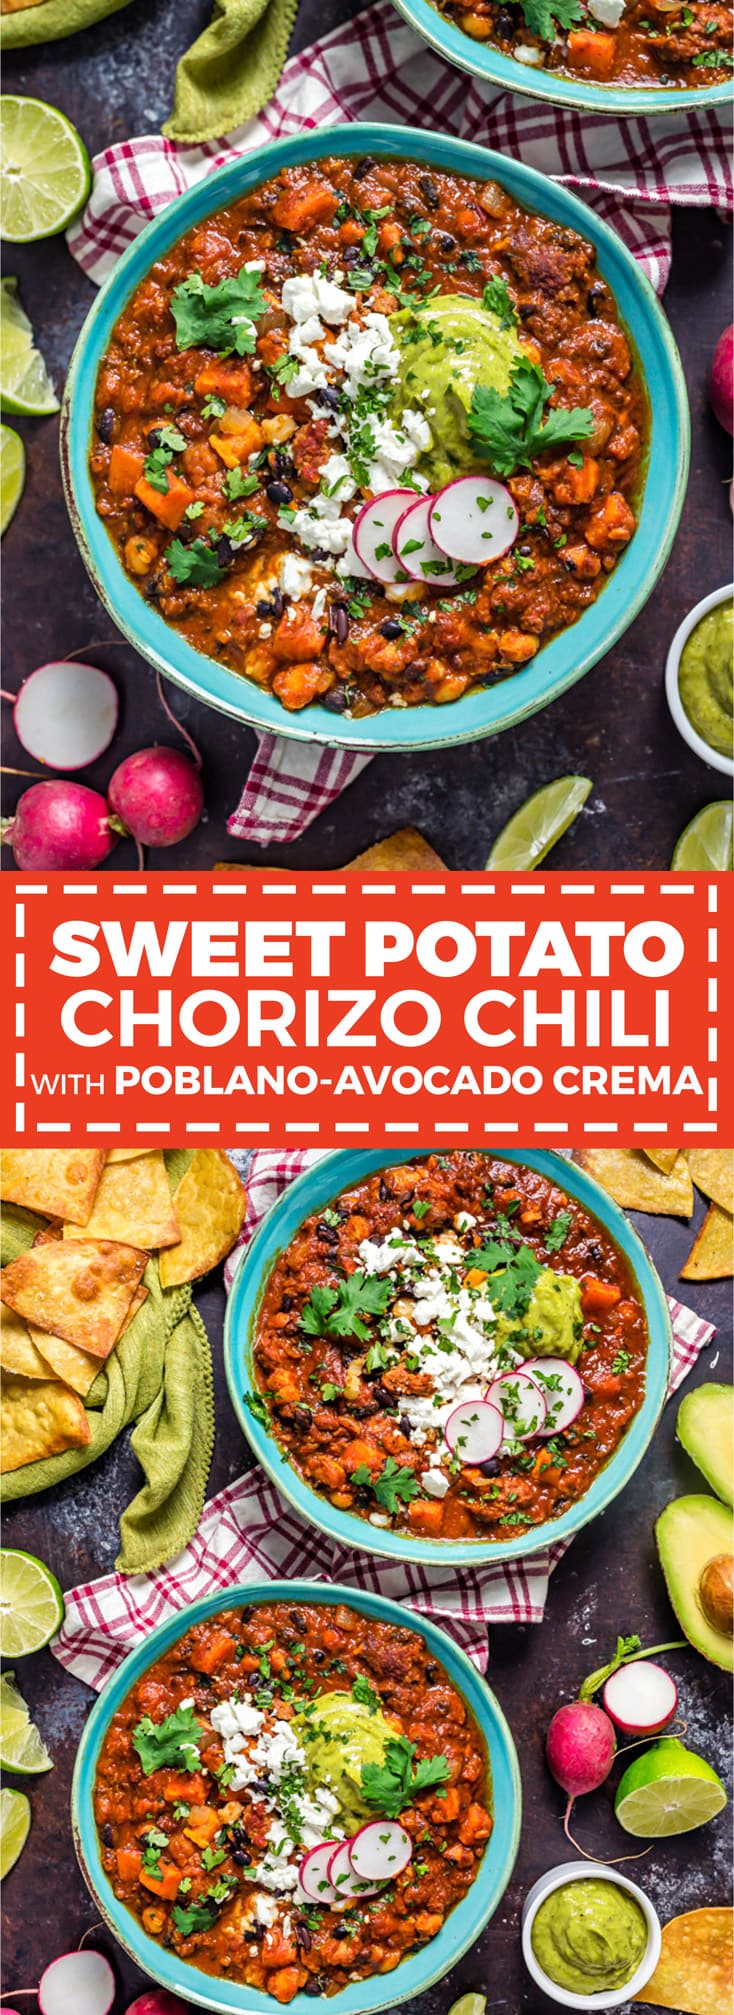 Sweet Potato Chorizo Chili with Poblano-Avocado Crema. If you've never added potatoes to chili before, be prepared to be wowed by the heartiness of this intensely flavor-packed chili. There's a reason I've been making this recipe for years!  | hostthetoast.com